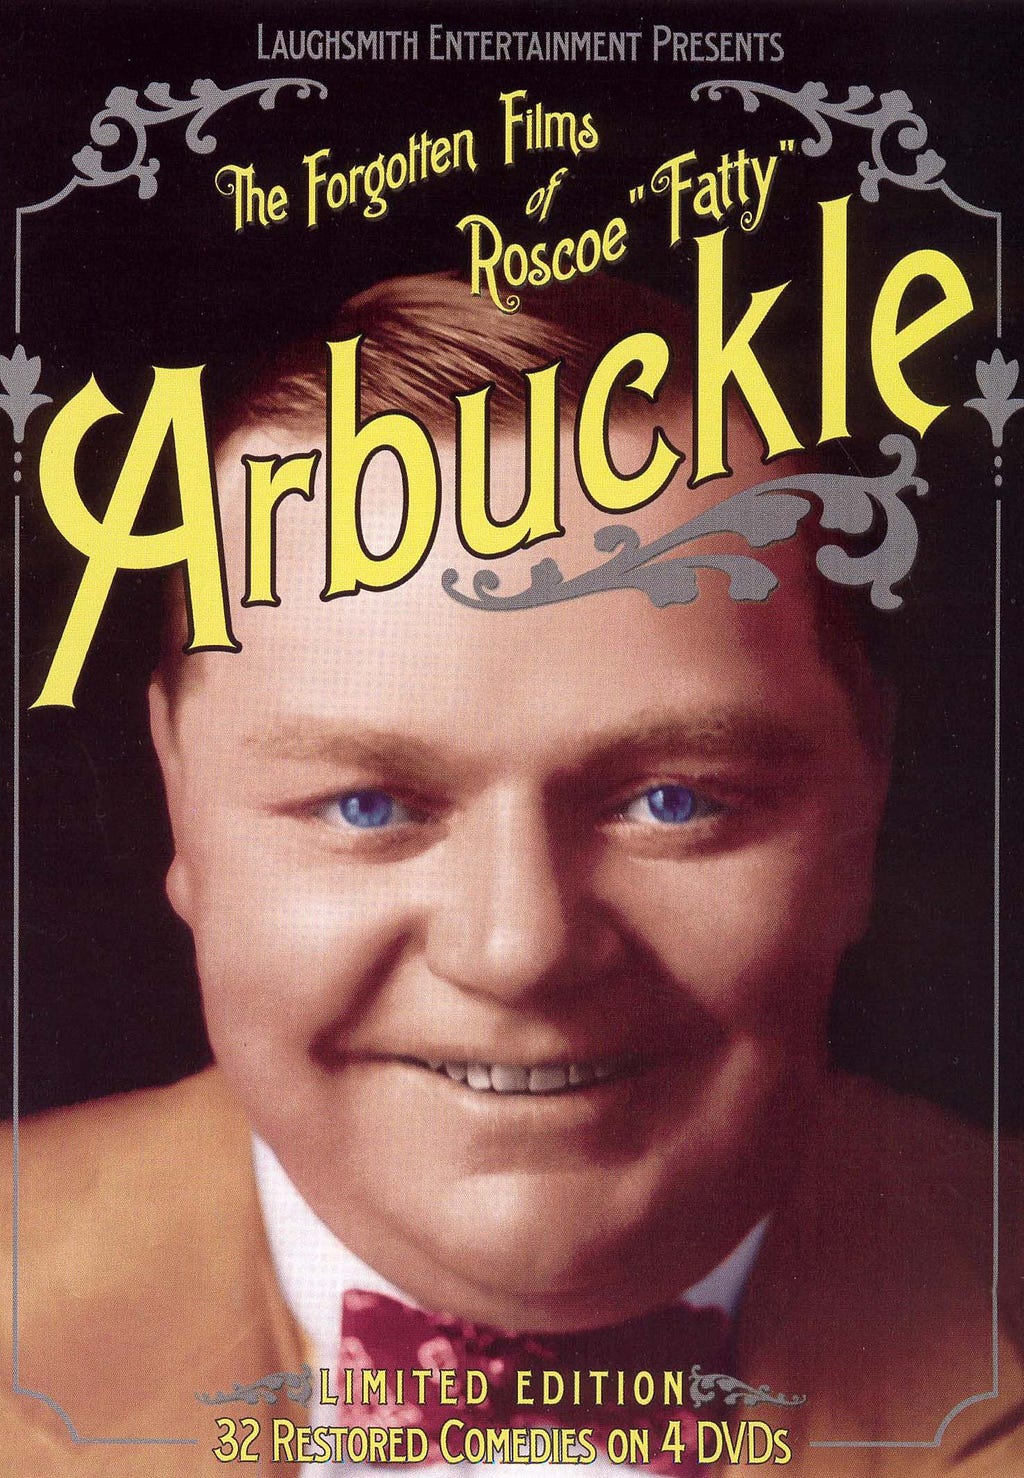 The Forgotten Films of Roscoe Fatty Arbuckle (2005) | Poster